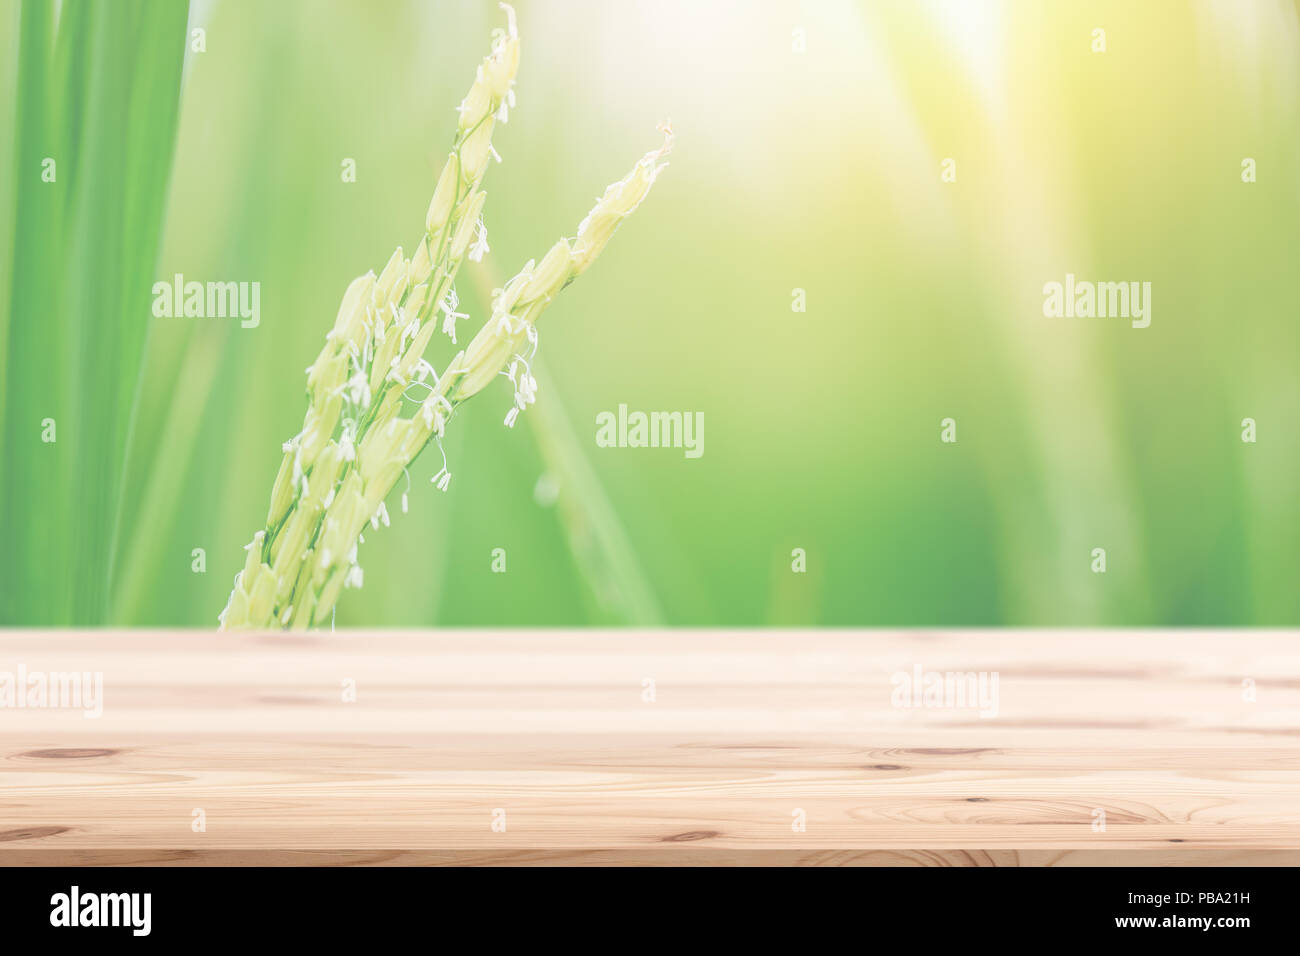 rice field with wooden table foreground for green clean food background natural design Stock Photo